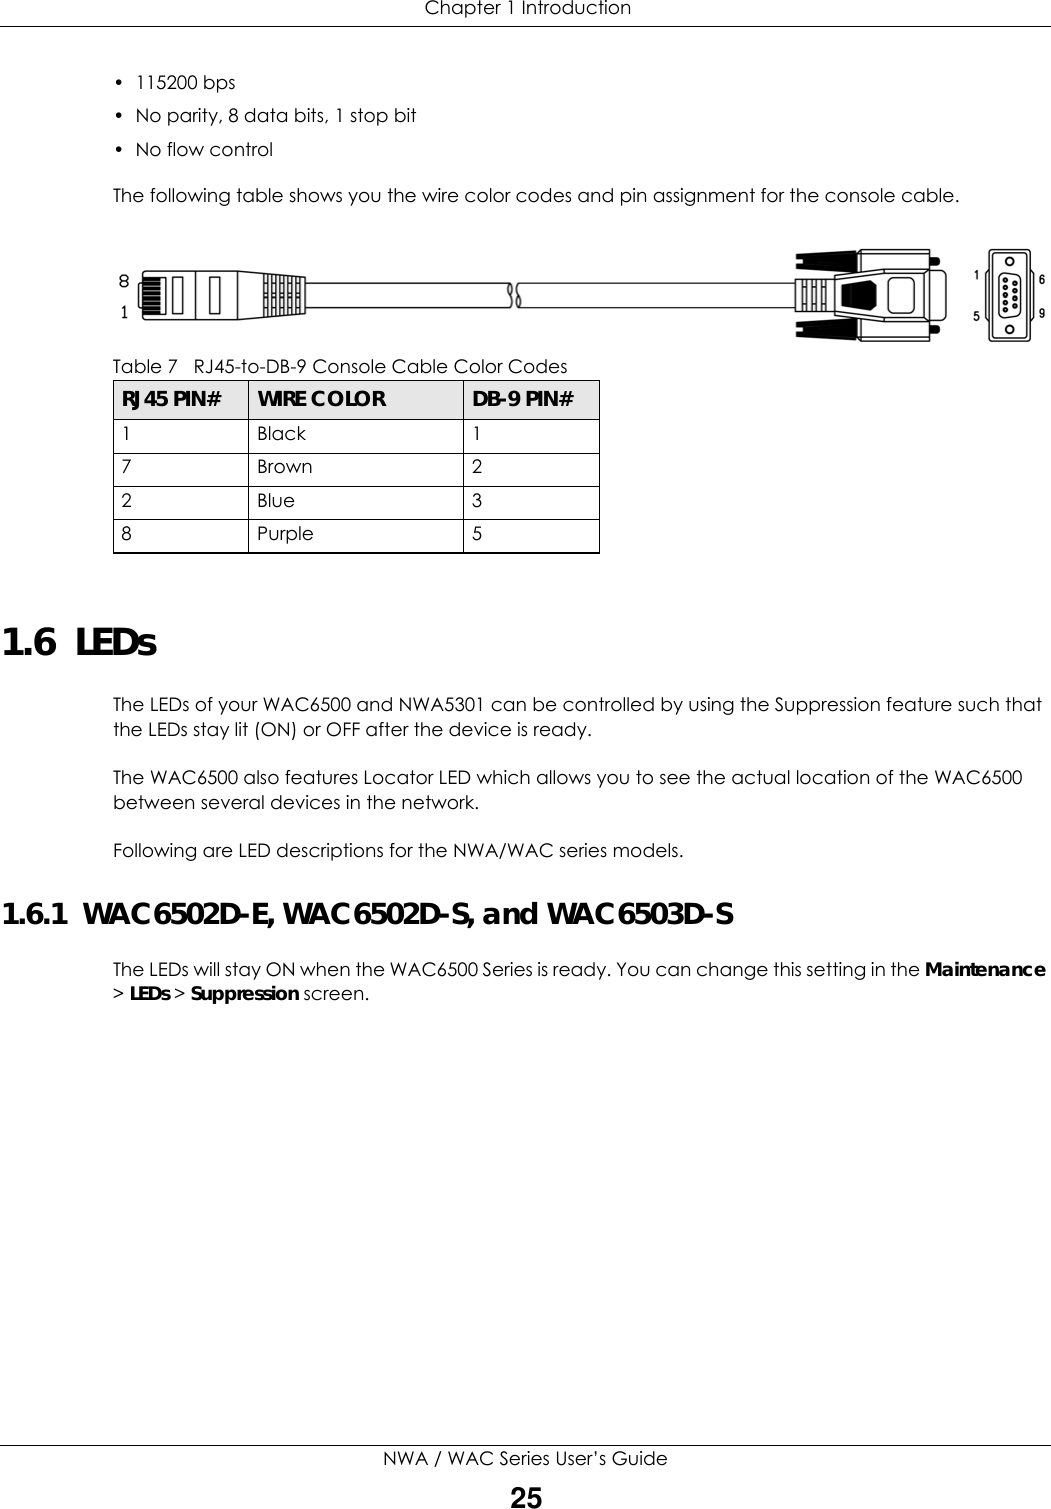  Chapter 1 IntroductionNWA / WAC Series User’s Guide25• 115200 bps• No parity, 8 data bits, 1 stop bit• No flow controlThe following table shows you the wire color codes and pin assignment for the console cable.      1.6  LEDsThe LEDs of your WAC6500 and NWA5301 can be controlled by using the Suppression feature such that the LEDs stay lit (ON) or OFF after the device is ready. The WAC6500 also features Locator LED which allows you to see the actual location of the WAC6500 between several devices in the network.Following are LED descriptions for the NWA/WAC series models.1.6.1  WAC6502D-E, WAC6502D-S, and WAC6503D-S The LEDs will stay ON when the WAC6500 Series is ready. You can change this setting in the Maintenance &gt; LEDs &gt; Suppression screen.Table 7   RJ45-to-DB-9 Console Cable Color CodesRJ45 PIN# WIRE COLOR DB-9 PIN#1Black 17Brown 22Blue 38Purple 5